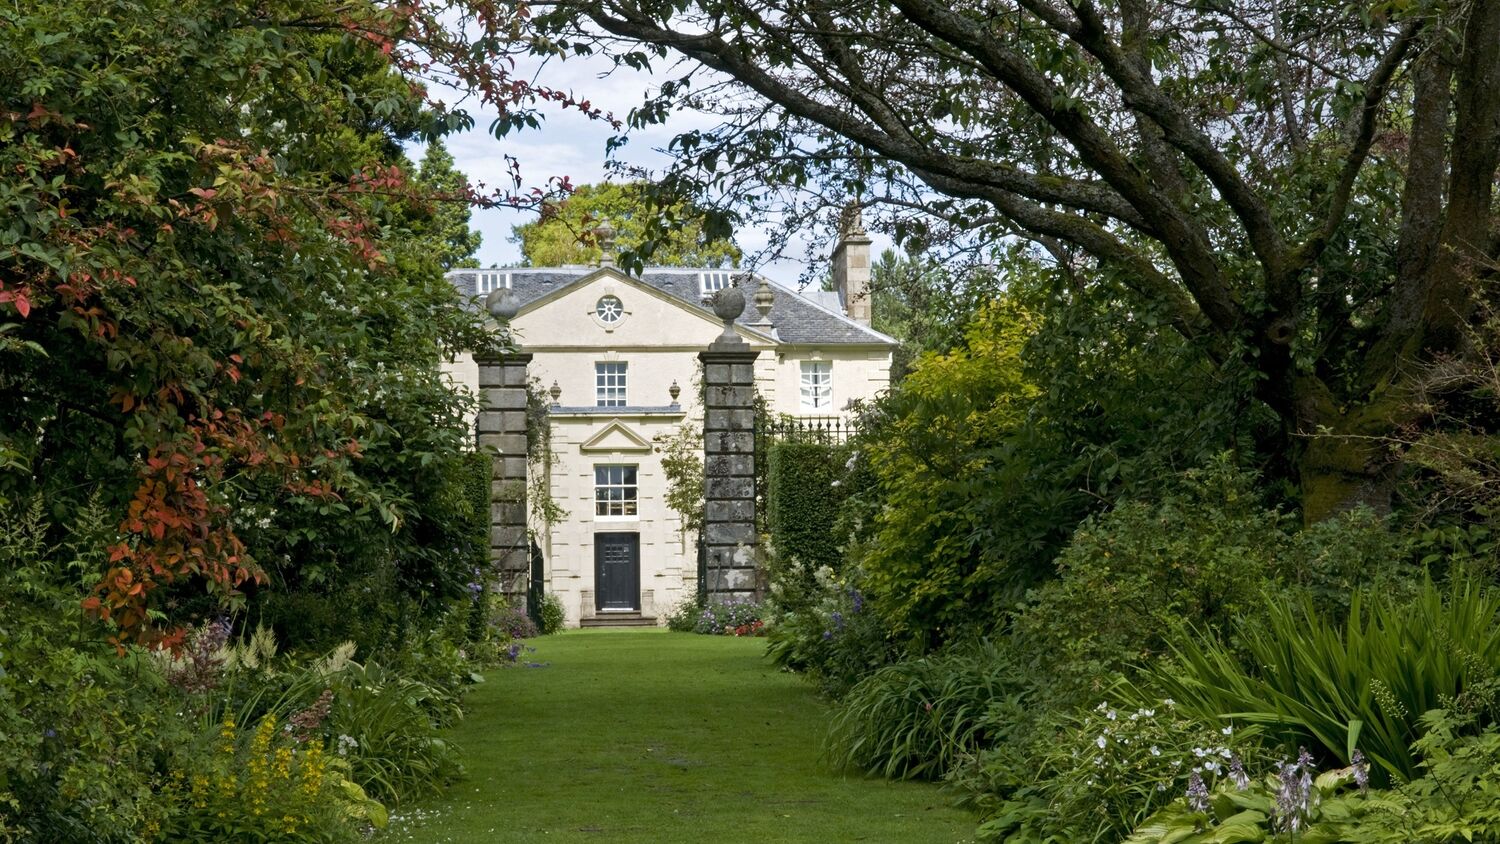 A view of the white stone 18th-century Greenbank House, seen from between two stone pillars in the garden. Lush flower beds run down either side from the gate pillars, filled with colourful plants, shrubs and trees.